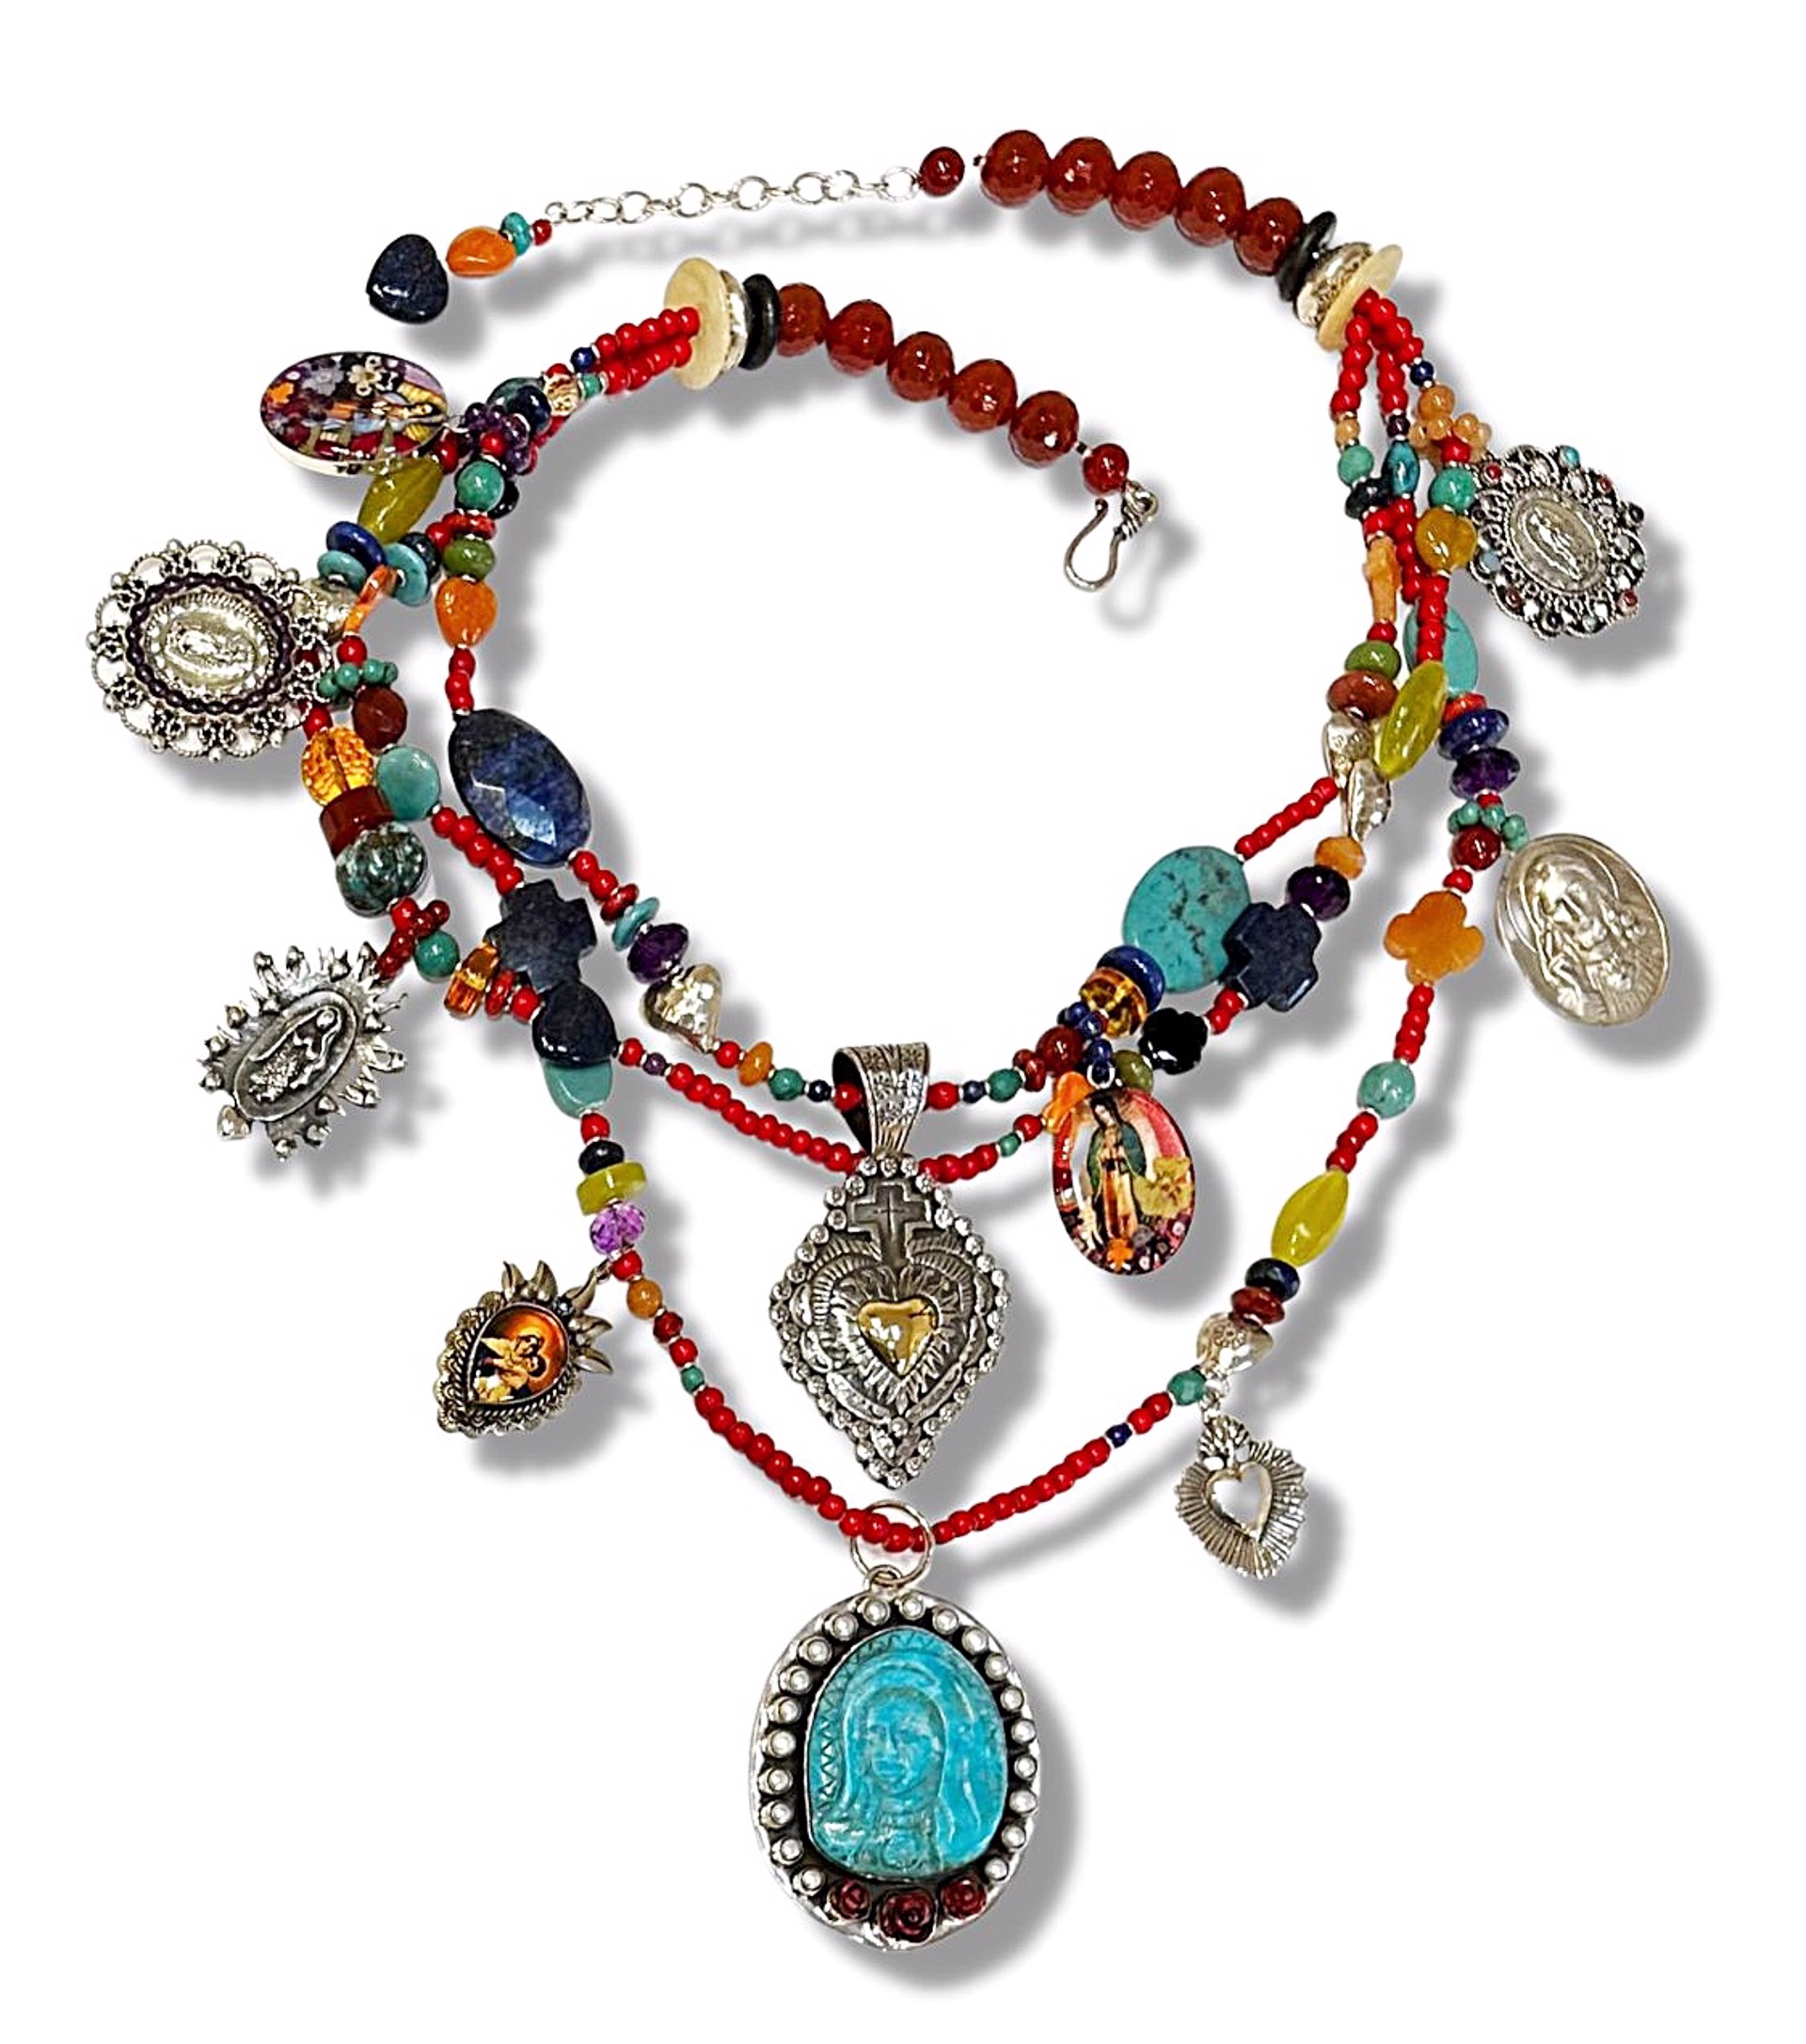 KY 1425 Virgin of Guadalupe Necklace by Kim Yubeta